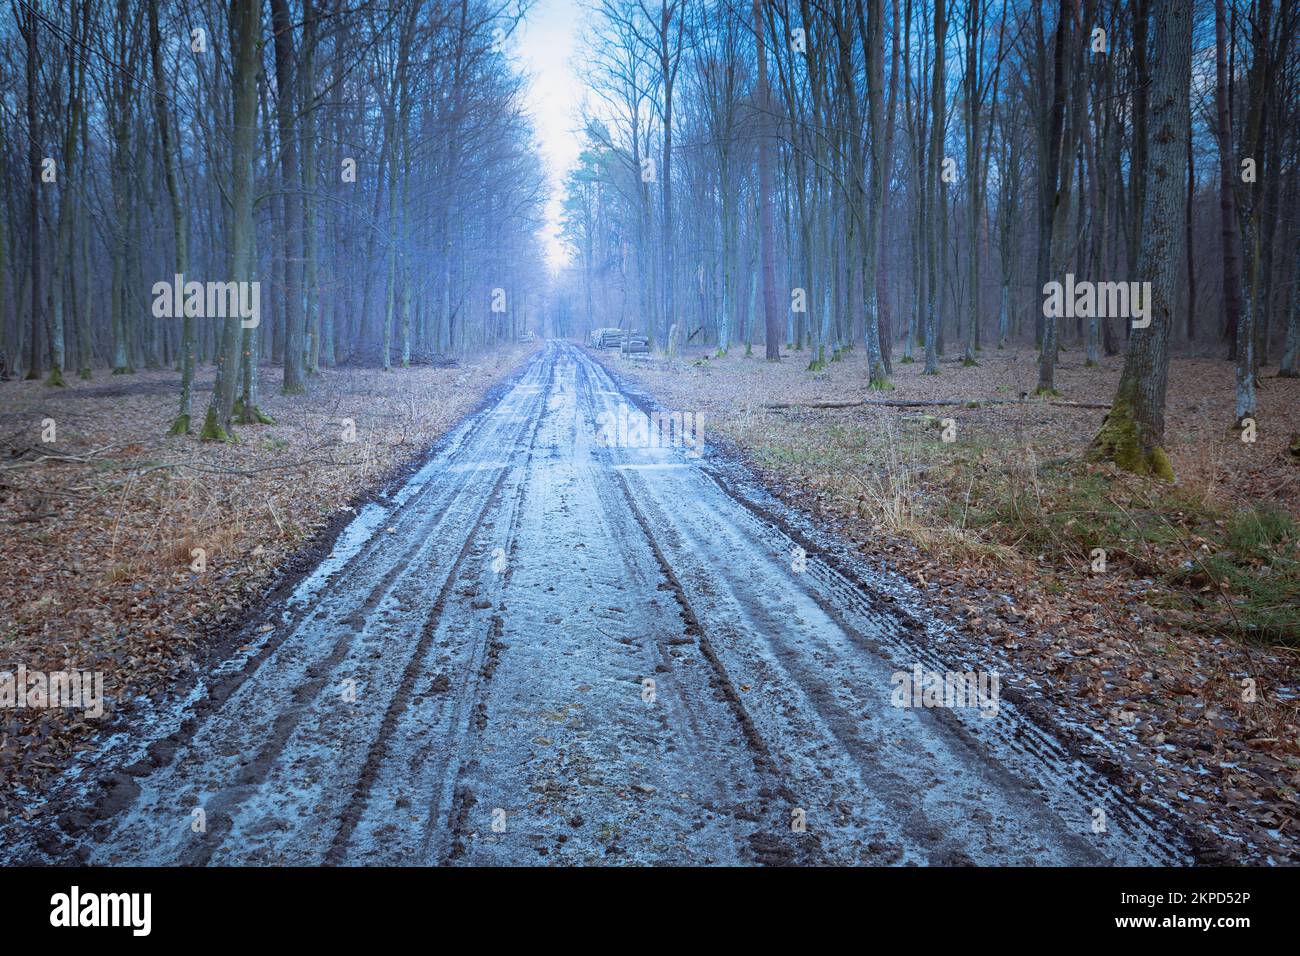 Frozen dirt road through a cold forest, eastern Poland Stock Photo